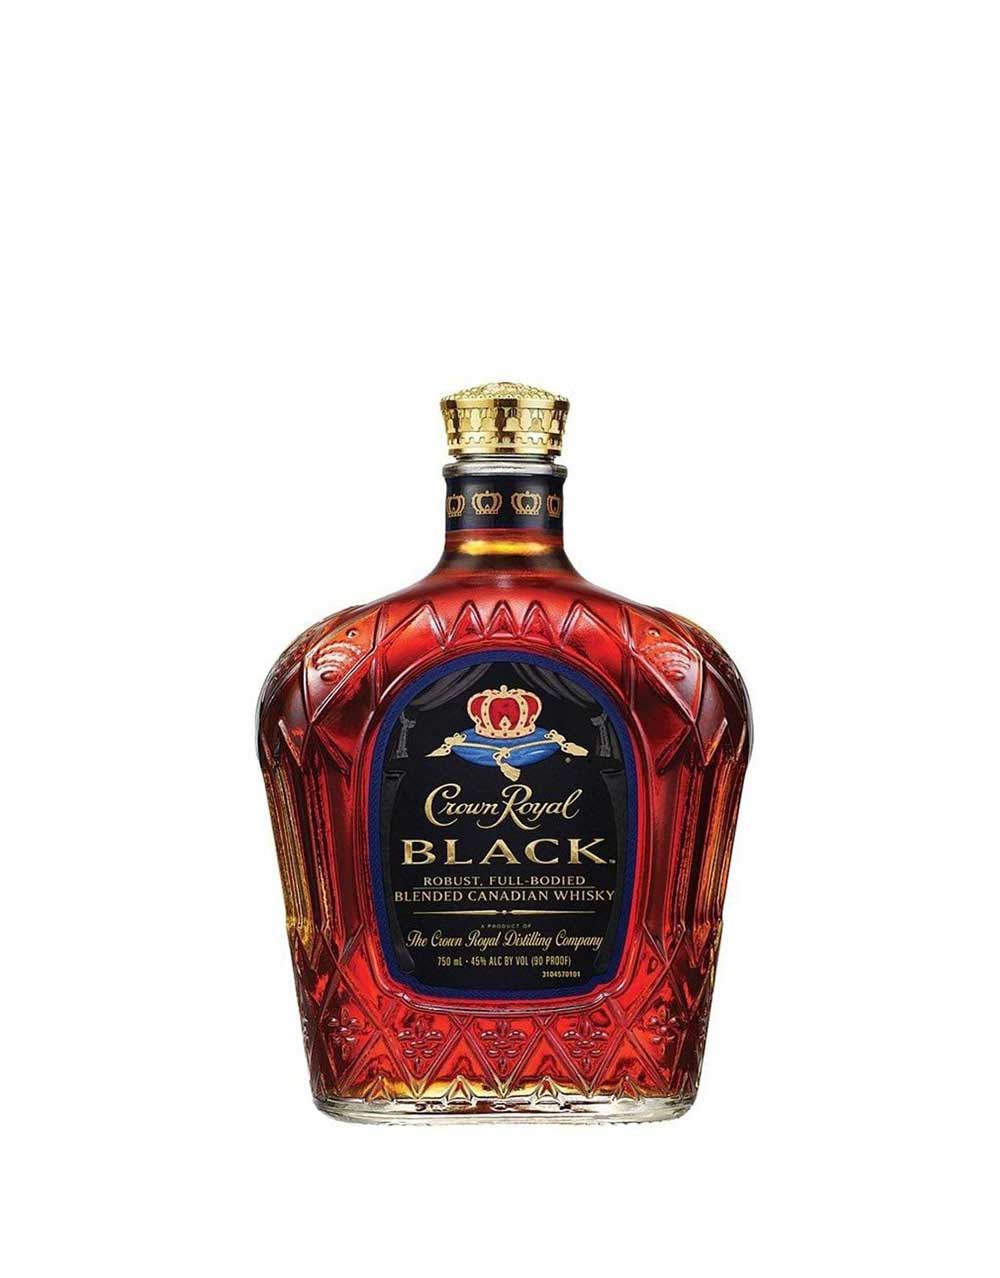 Chivas Regal 12 Years Blended Gift Set Limited Edition